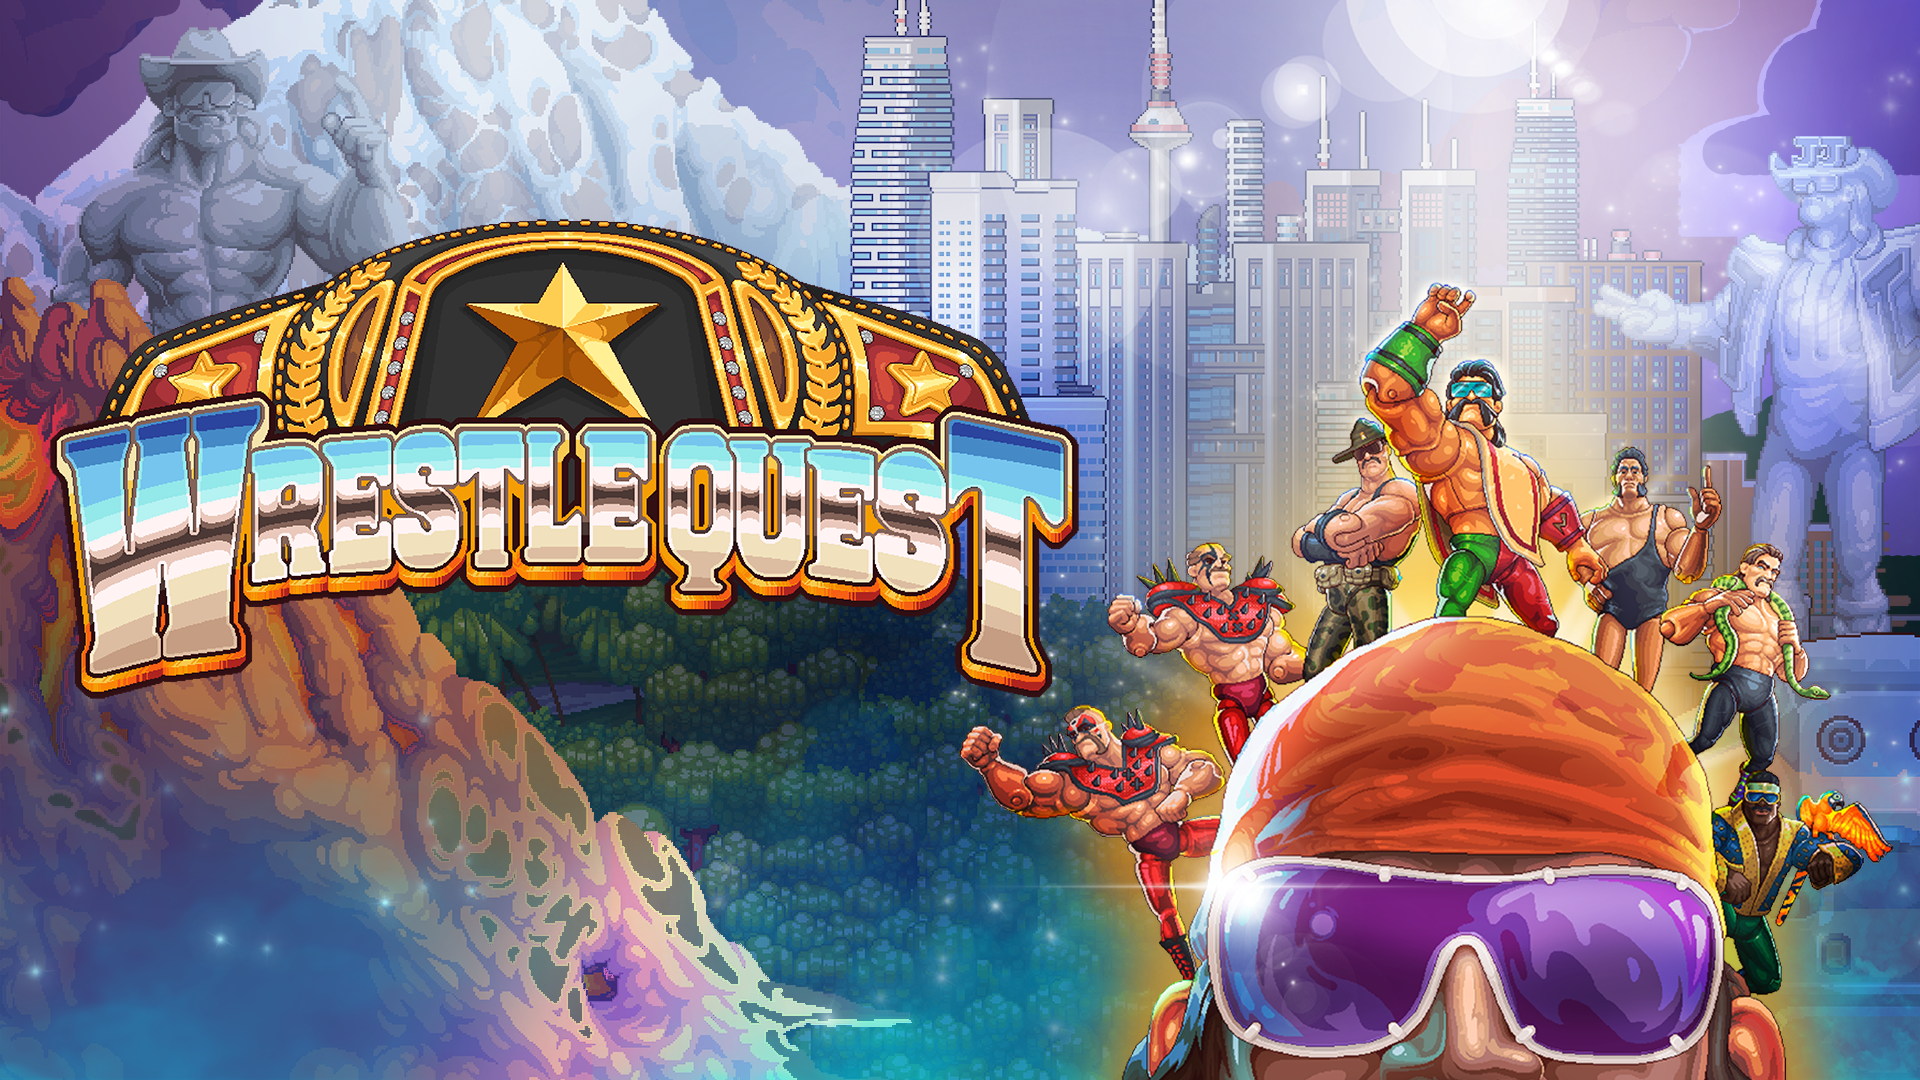 key art for WrestleQuest, with cartoon-style depictions of famous wrestlers The Road Warriors, Sgt. Slaughter, Randy Macho Man Savage, Andre the Giant, and Koko B. Ware